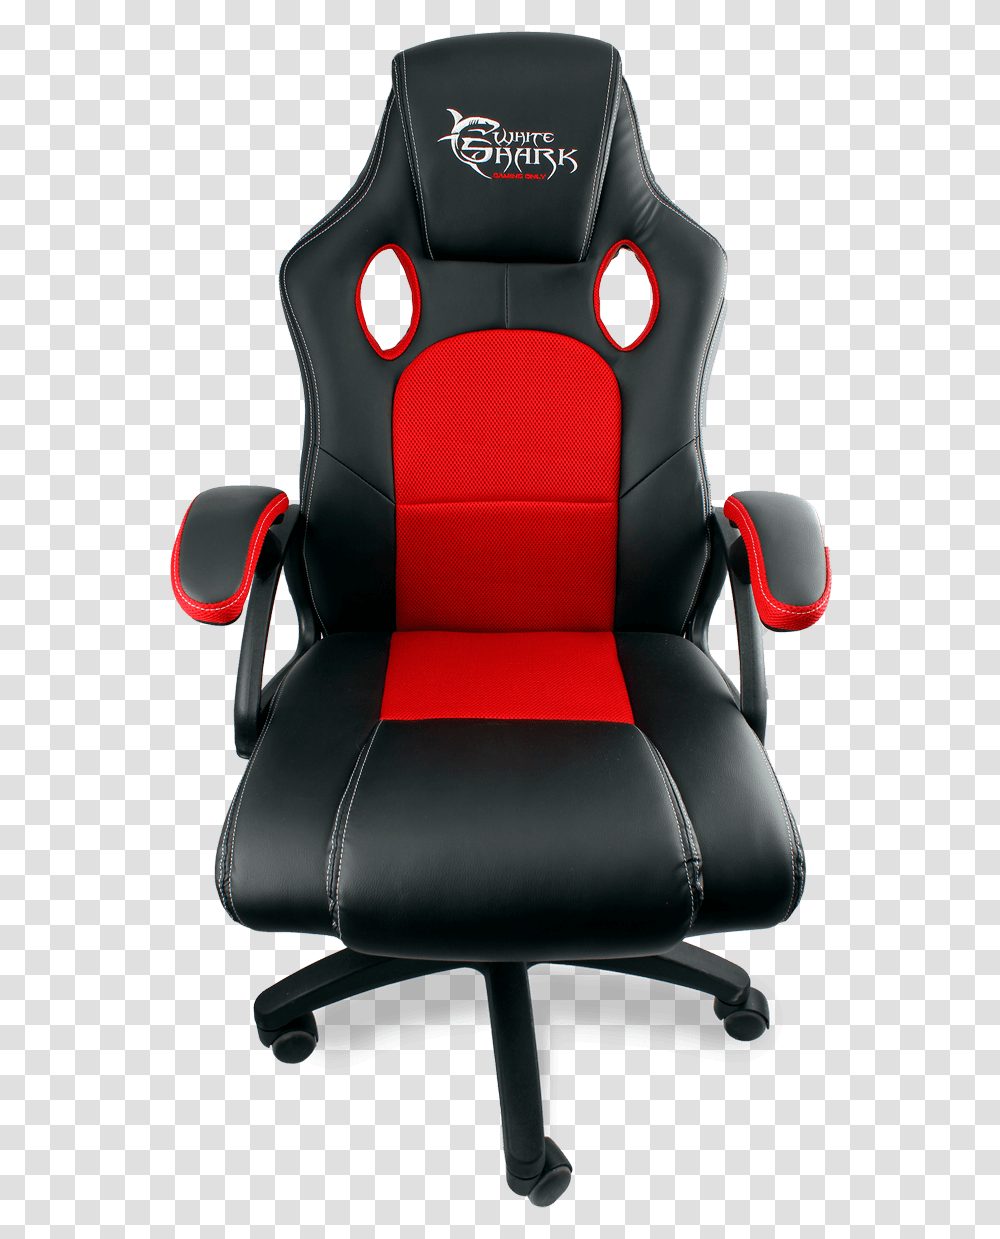 The Best White Shark Throne Gaming It White Shark Gaming Chairs, Furniture Transparent Png